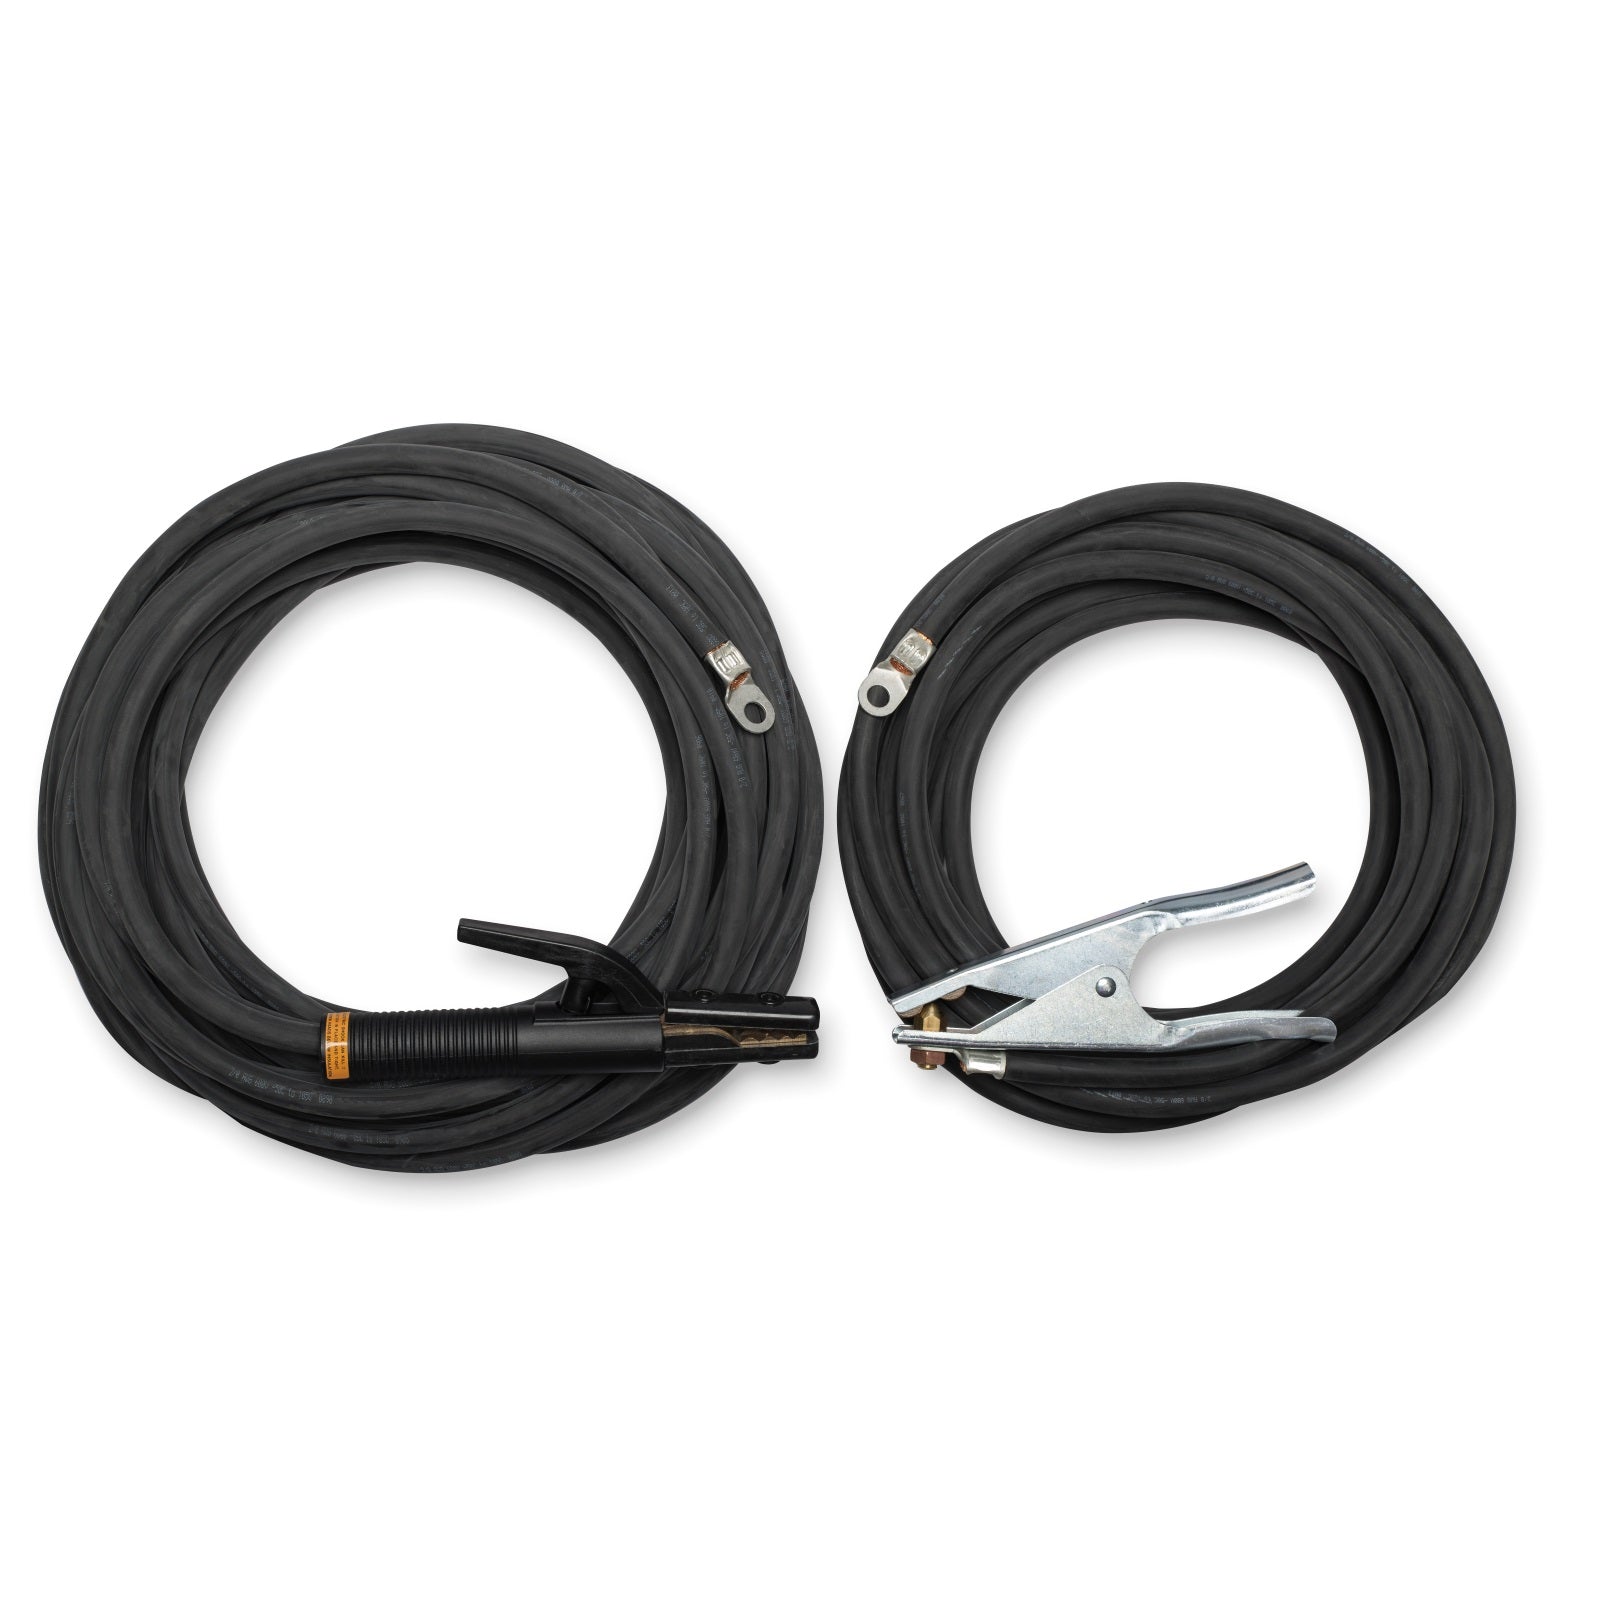 Miller 100' 2/0 Leads Stick Cable Set (043952)